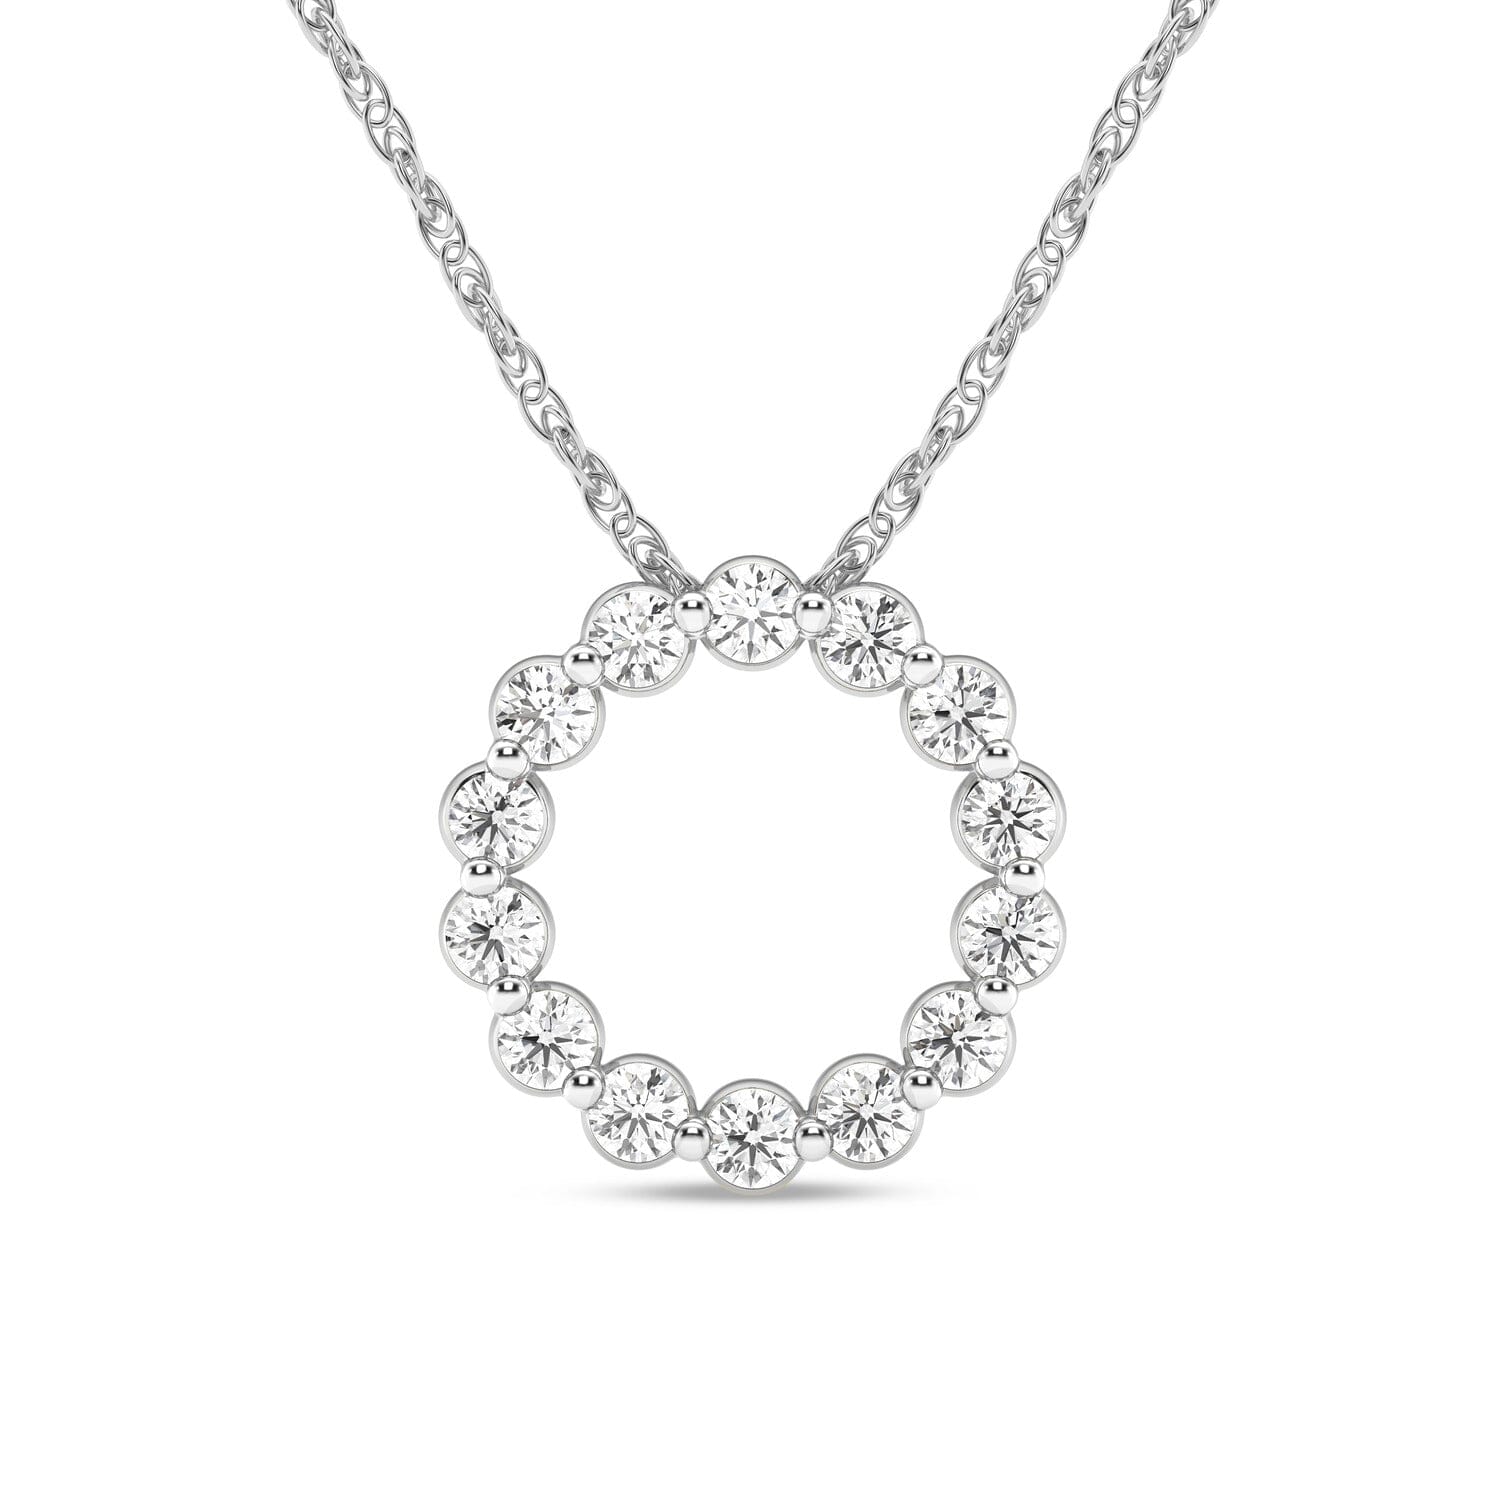 Meera Circle of Love Necklace with 1/2ct of Laboratory Grown Diamonds in 9ct White Gold Necklaces Bevilles 